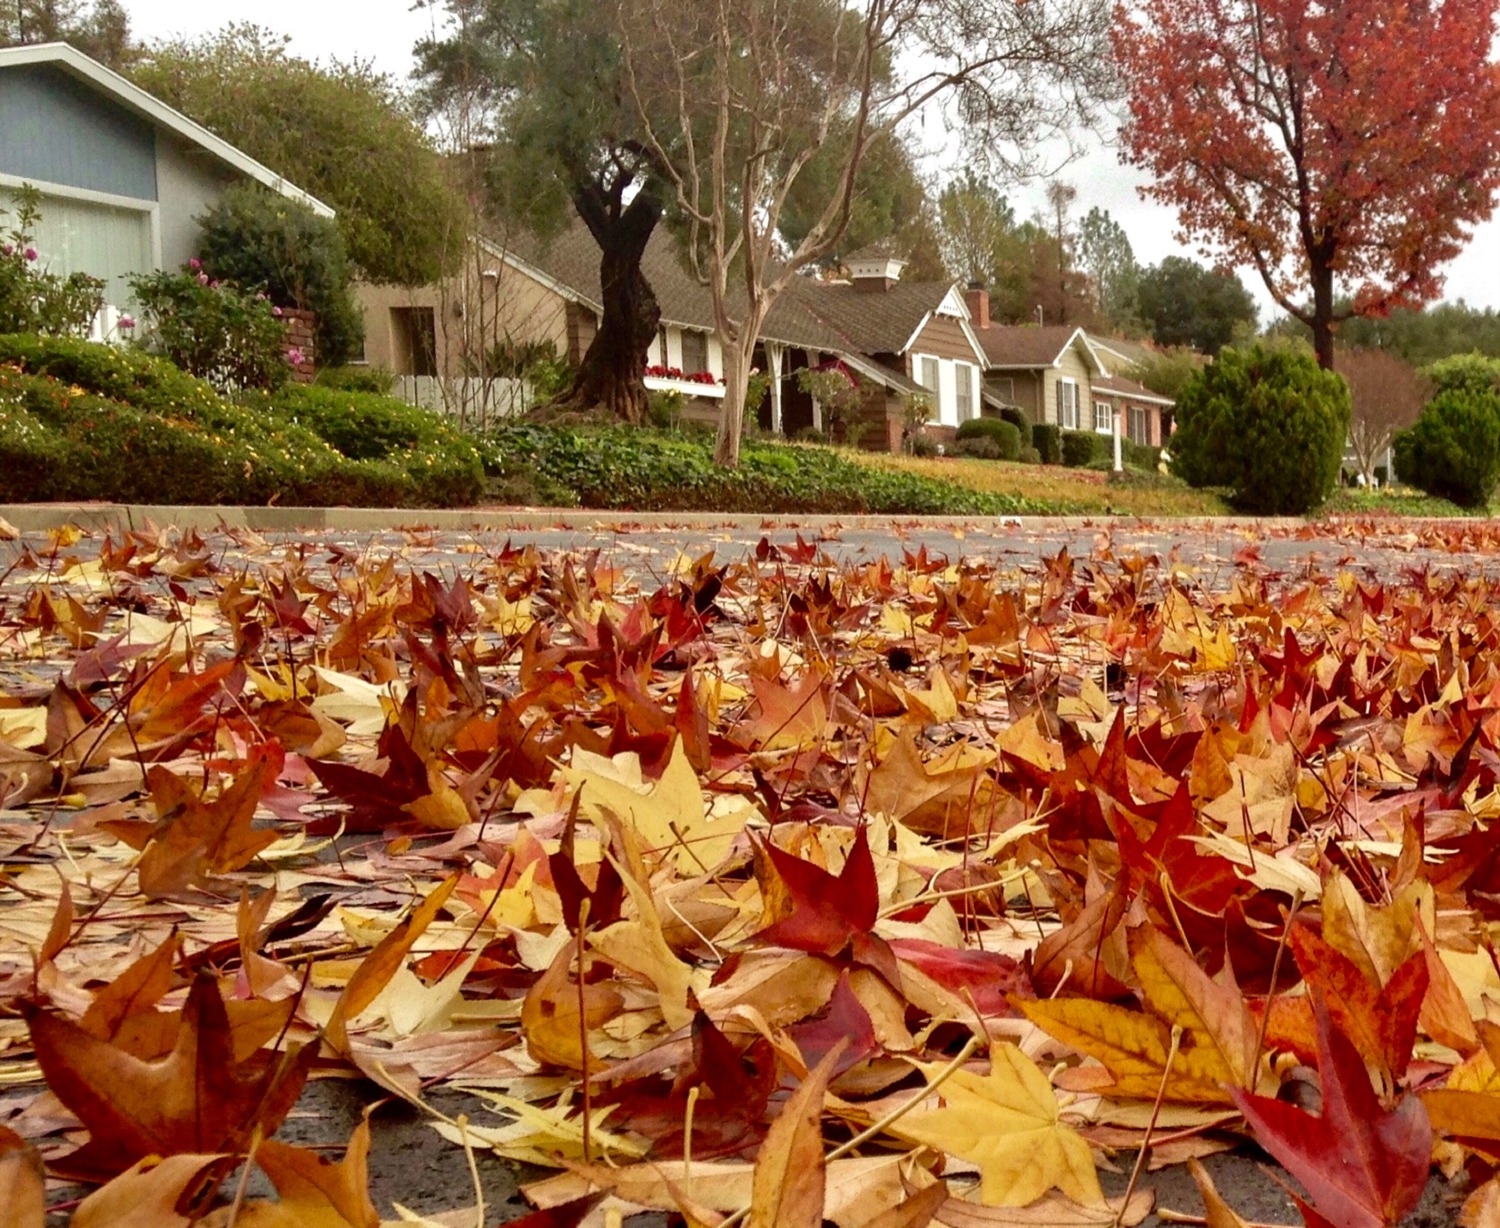 Autumn Market Brings Buyers Cooler Conditions